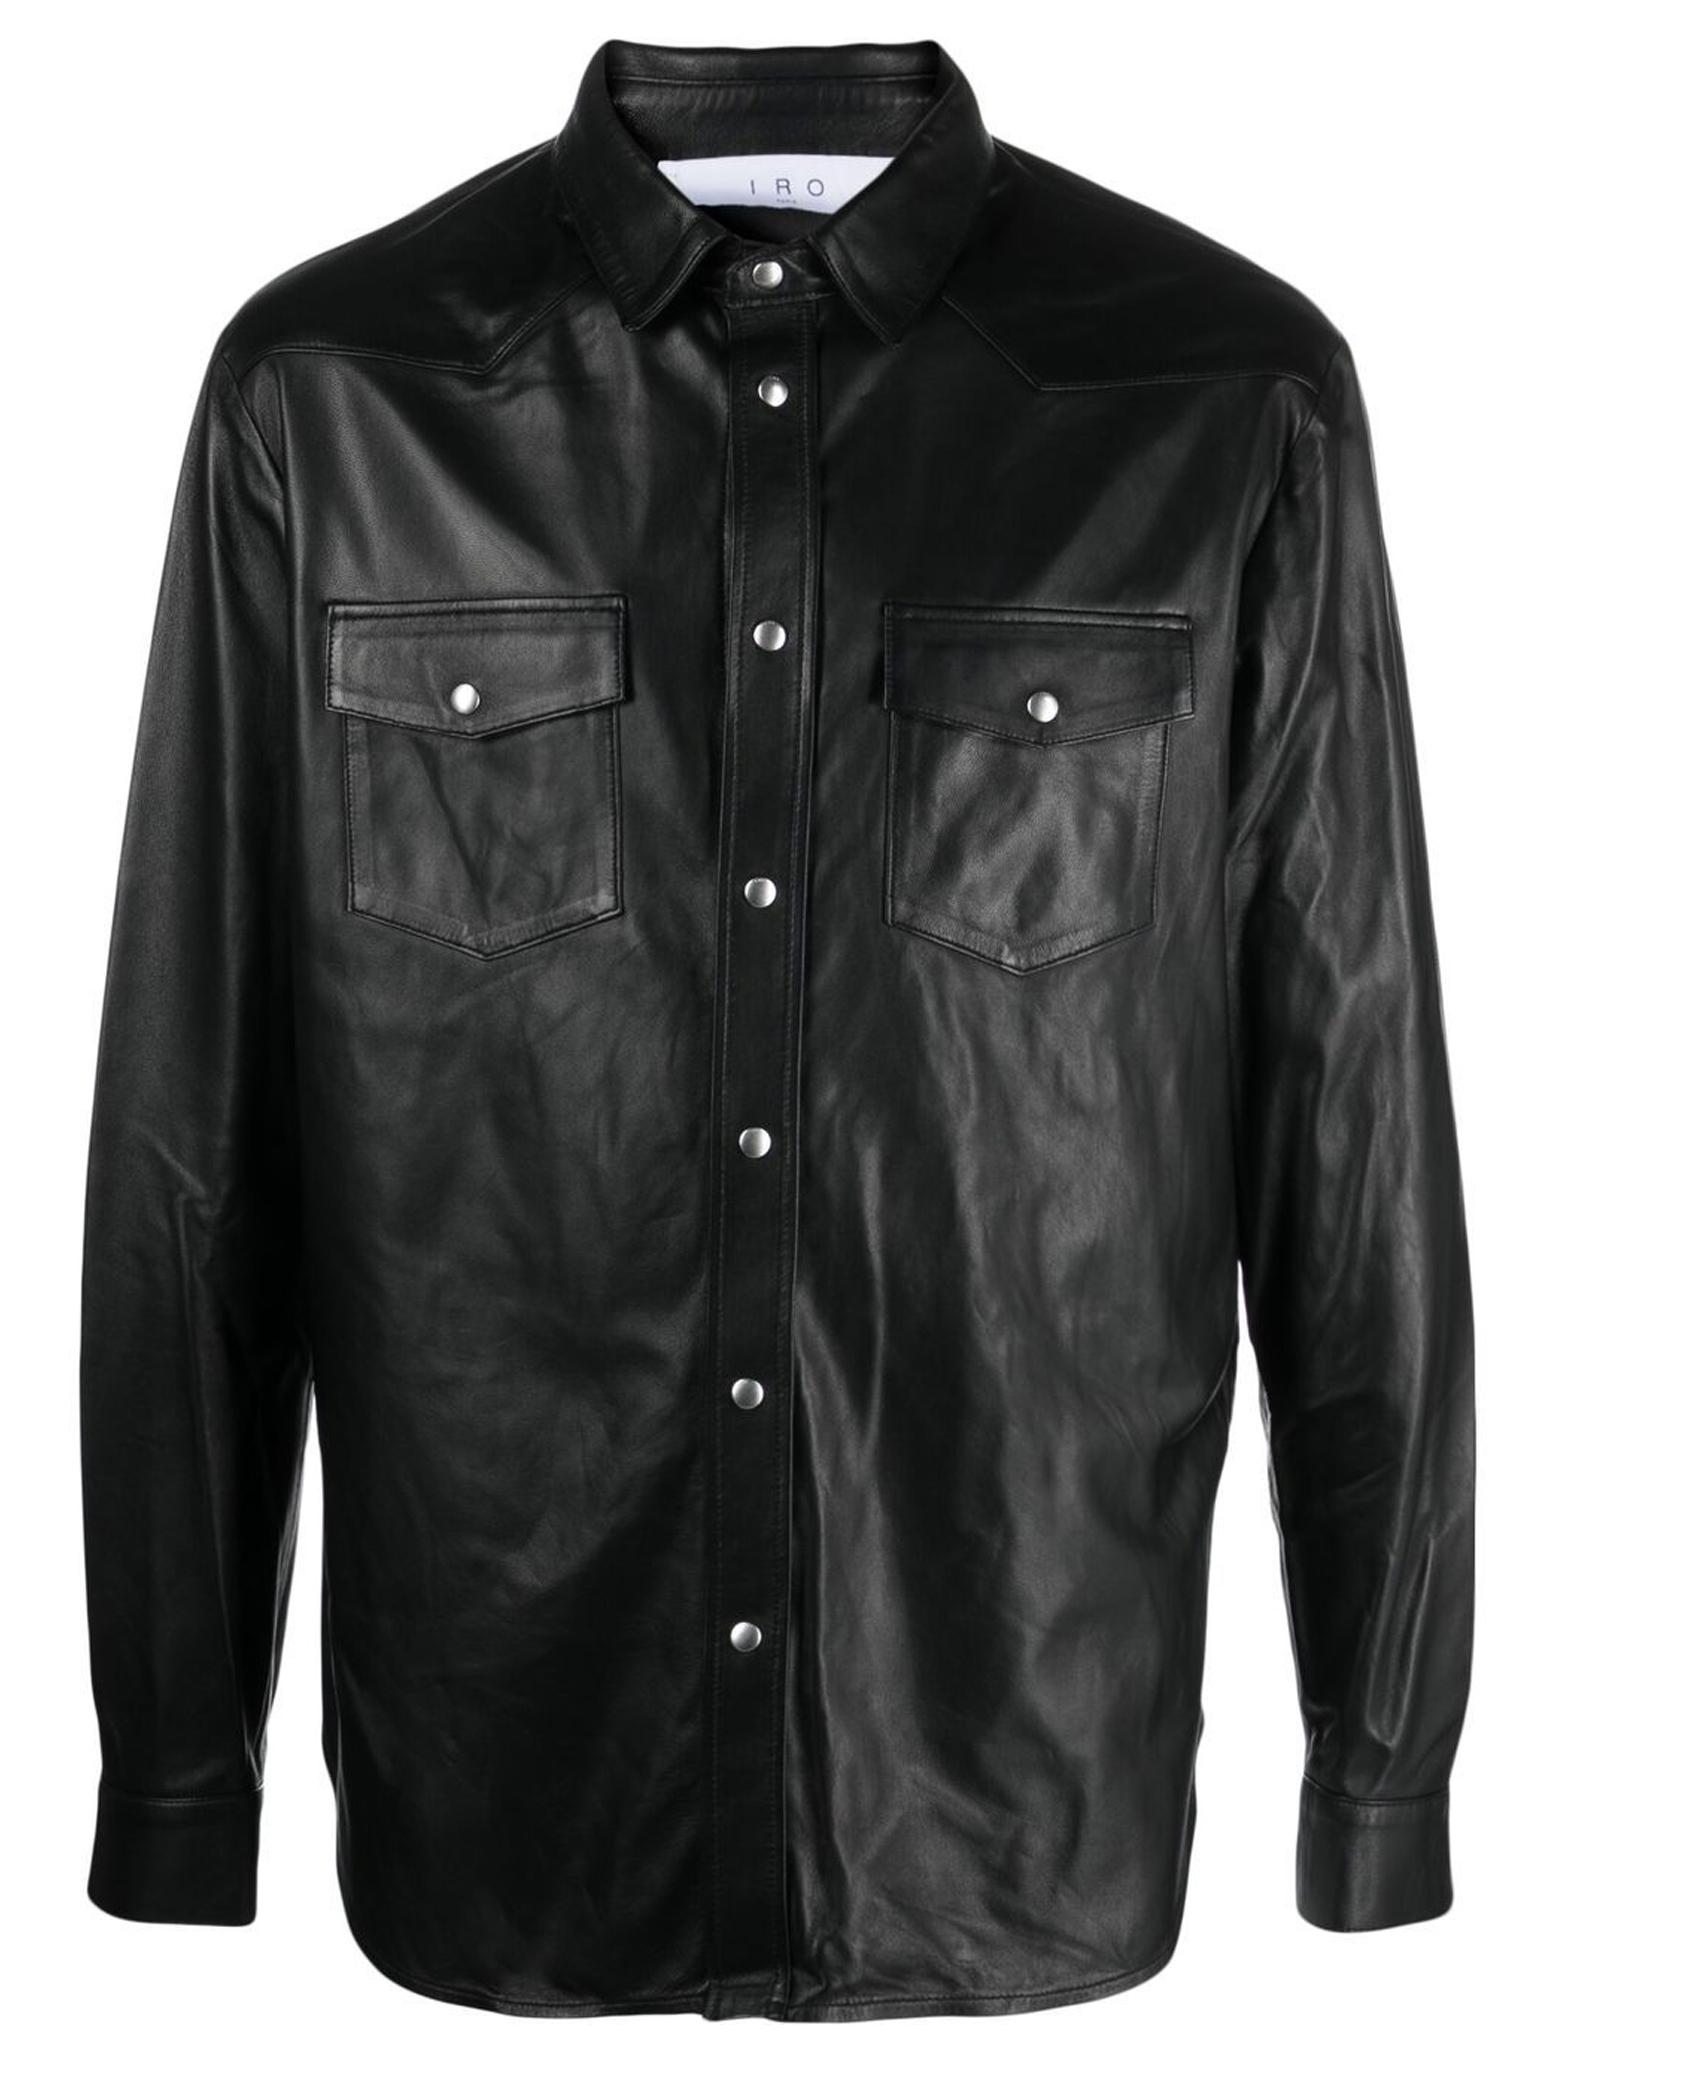 Section 8 Mickey Rourke Leather Jacket - A2 Jackets